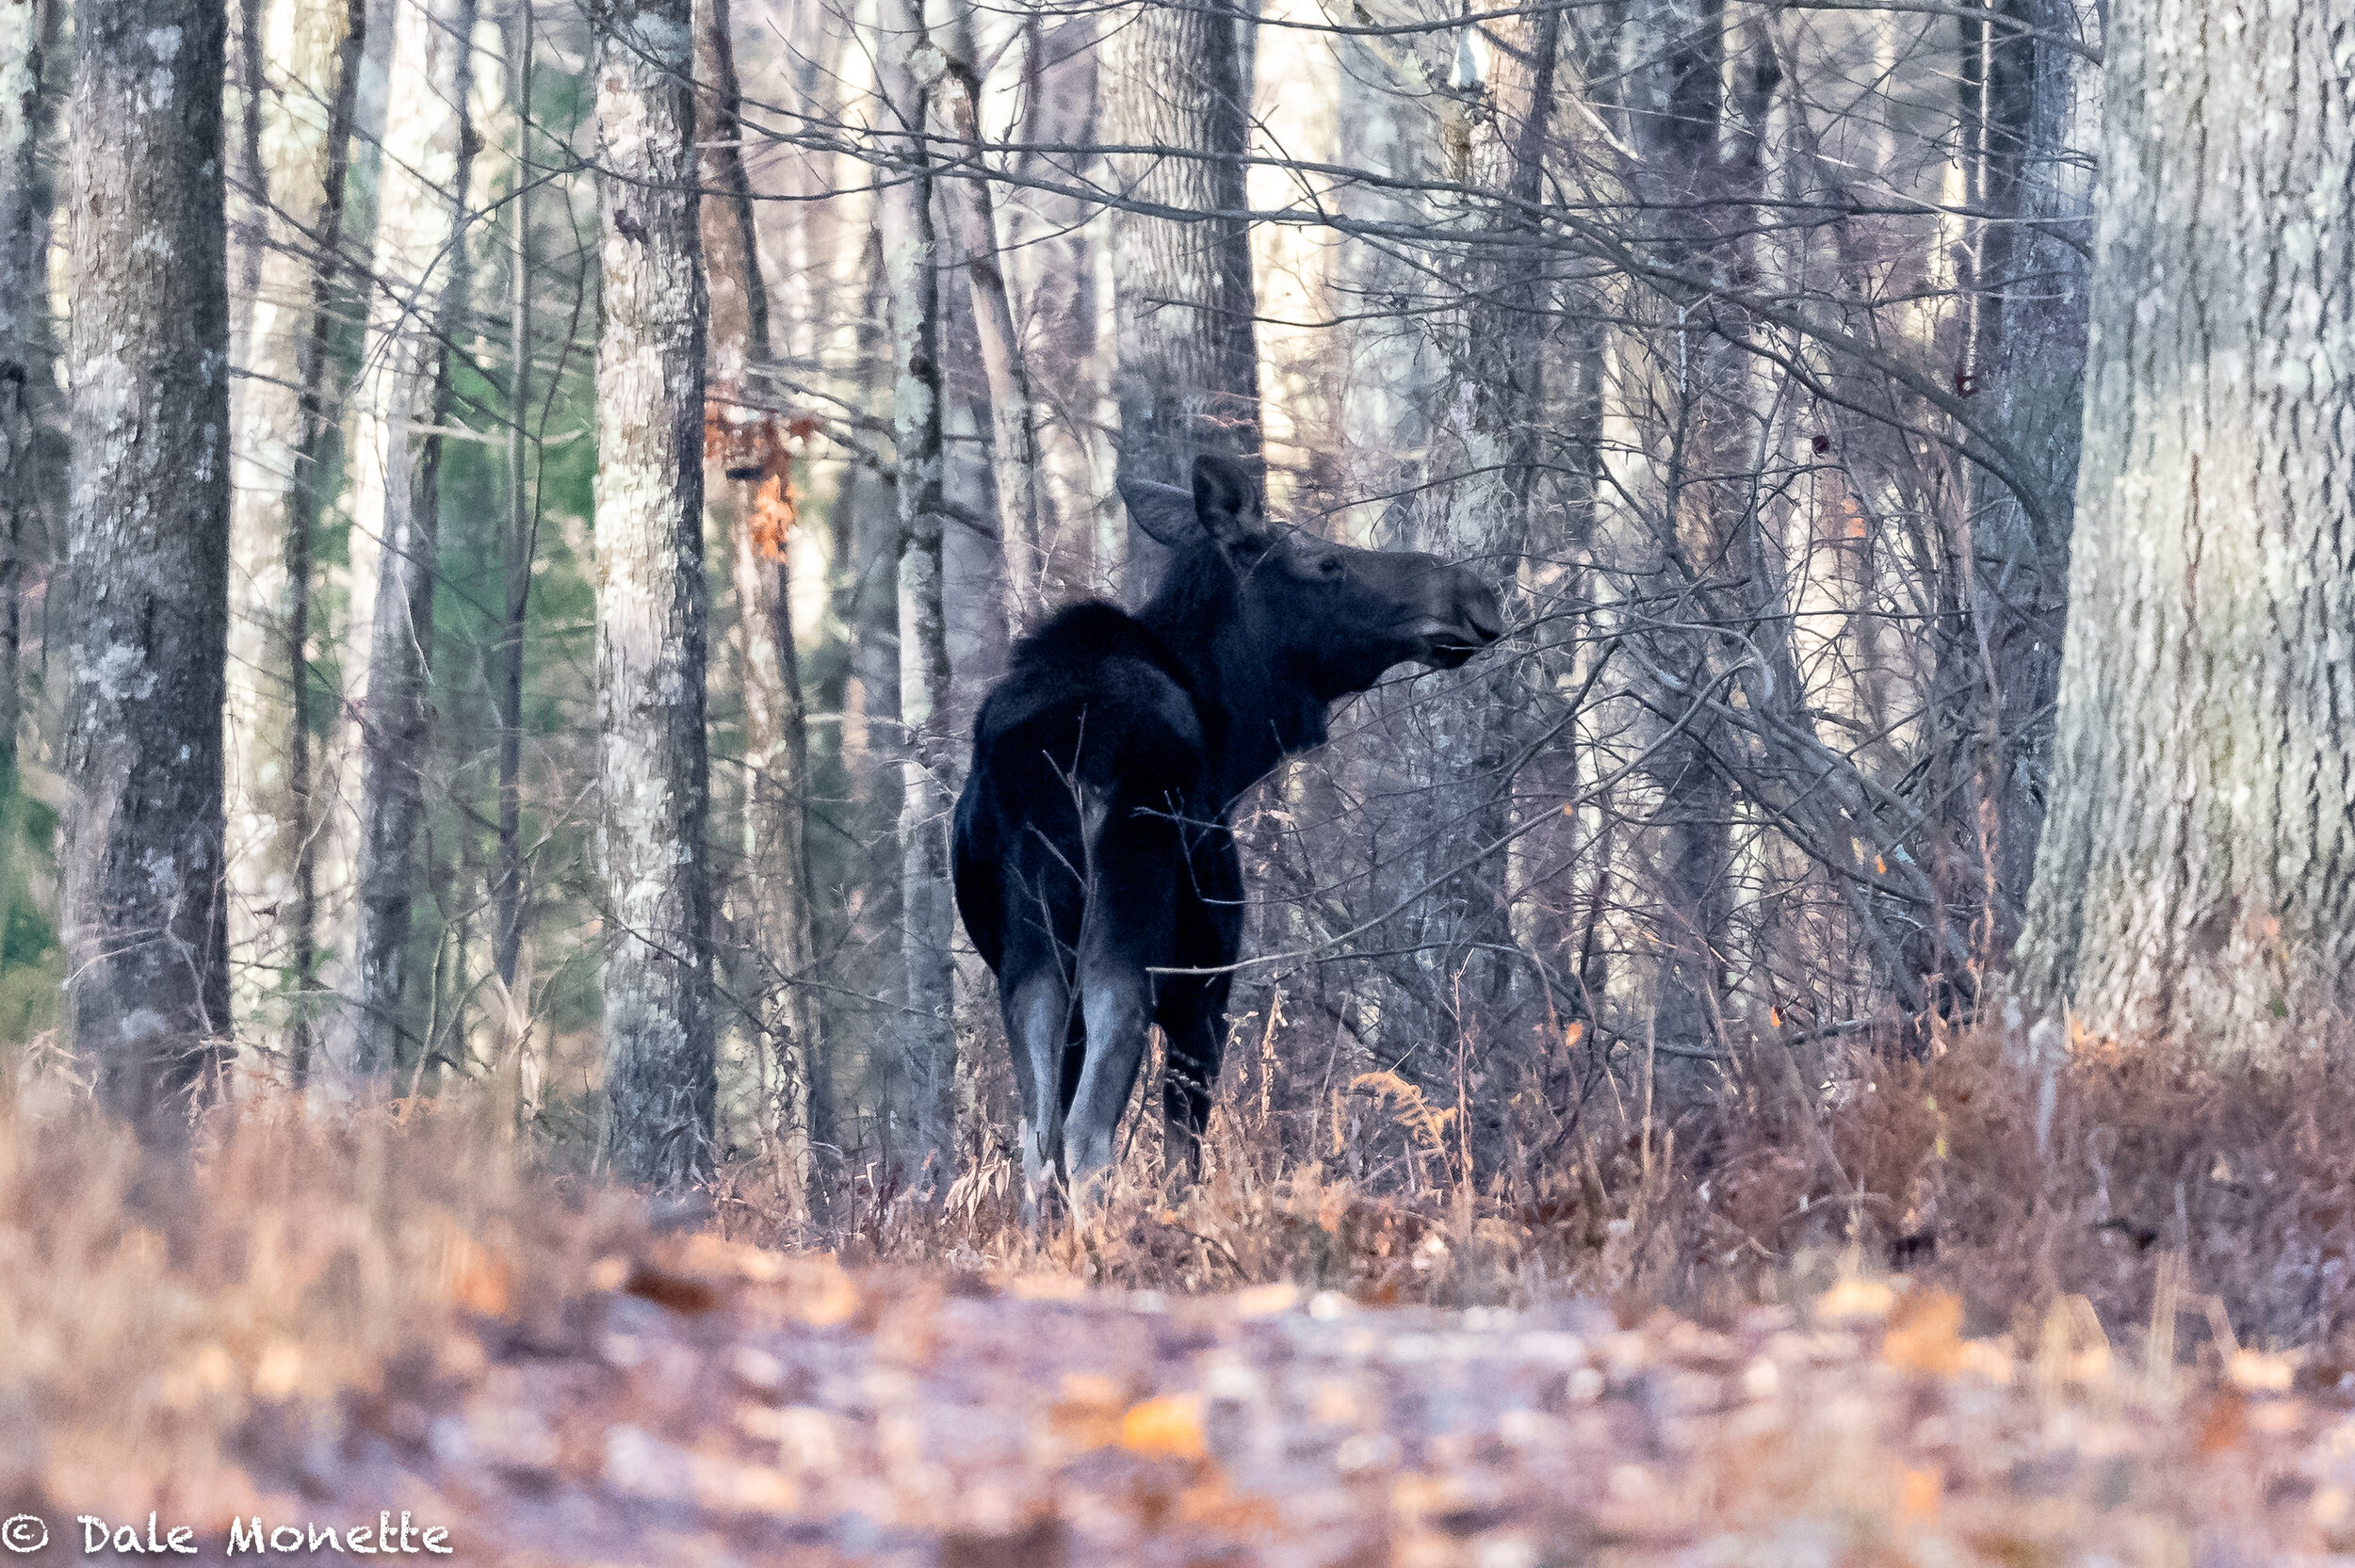   As I hiked around the corner last week a big black 7 foot high female moose was browsing along the side of the trail. I watched her for  about 15 minutes from about 125 yards away before she slowly wandered into the woods. It made my day!  